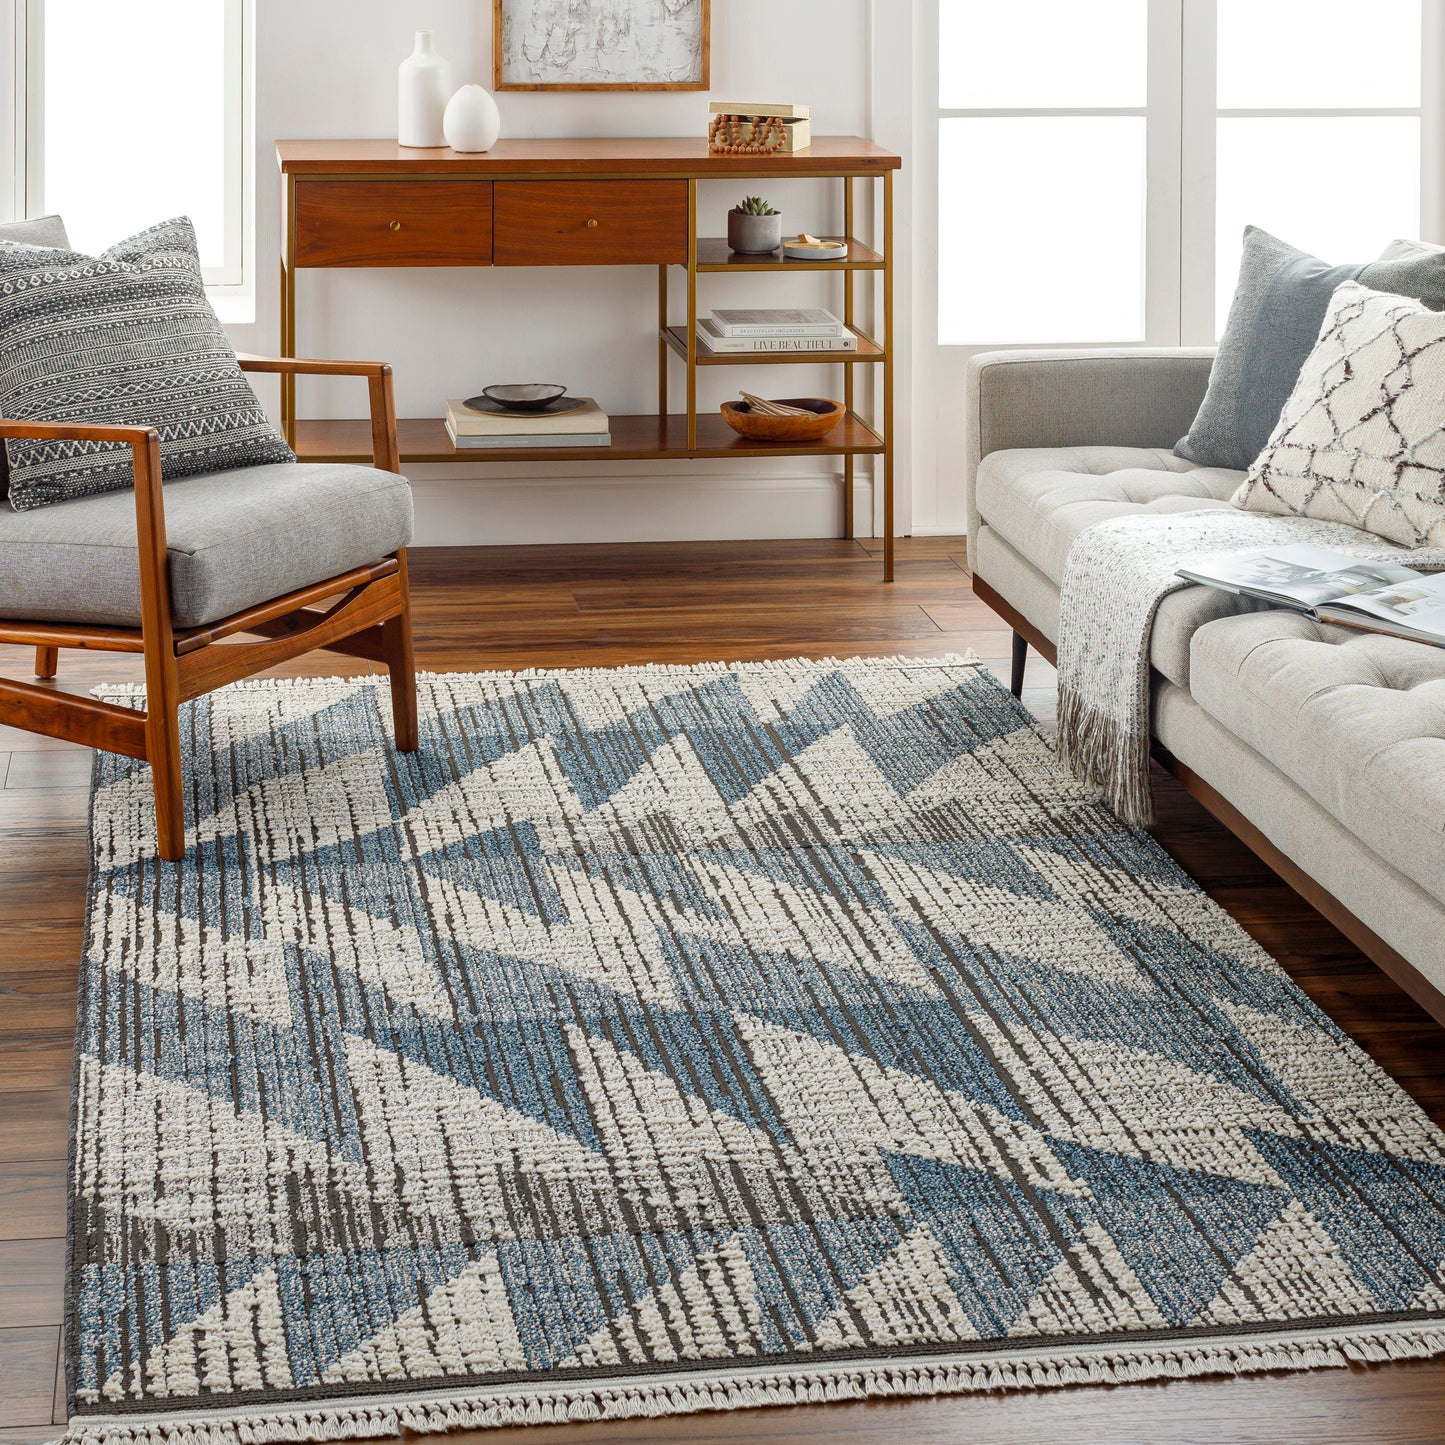 Berlin 31730 Machine Woven Synthetic Blend Indoor Area Rug by Surya Rugs